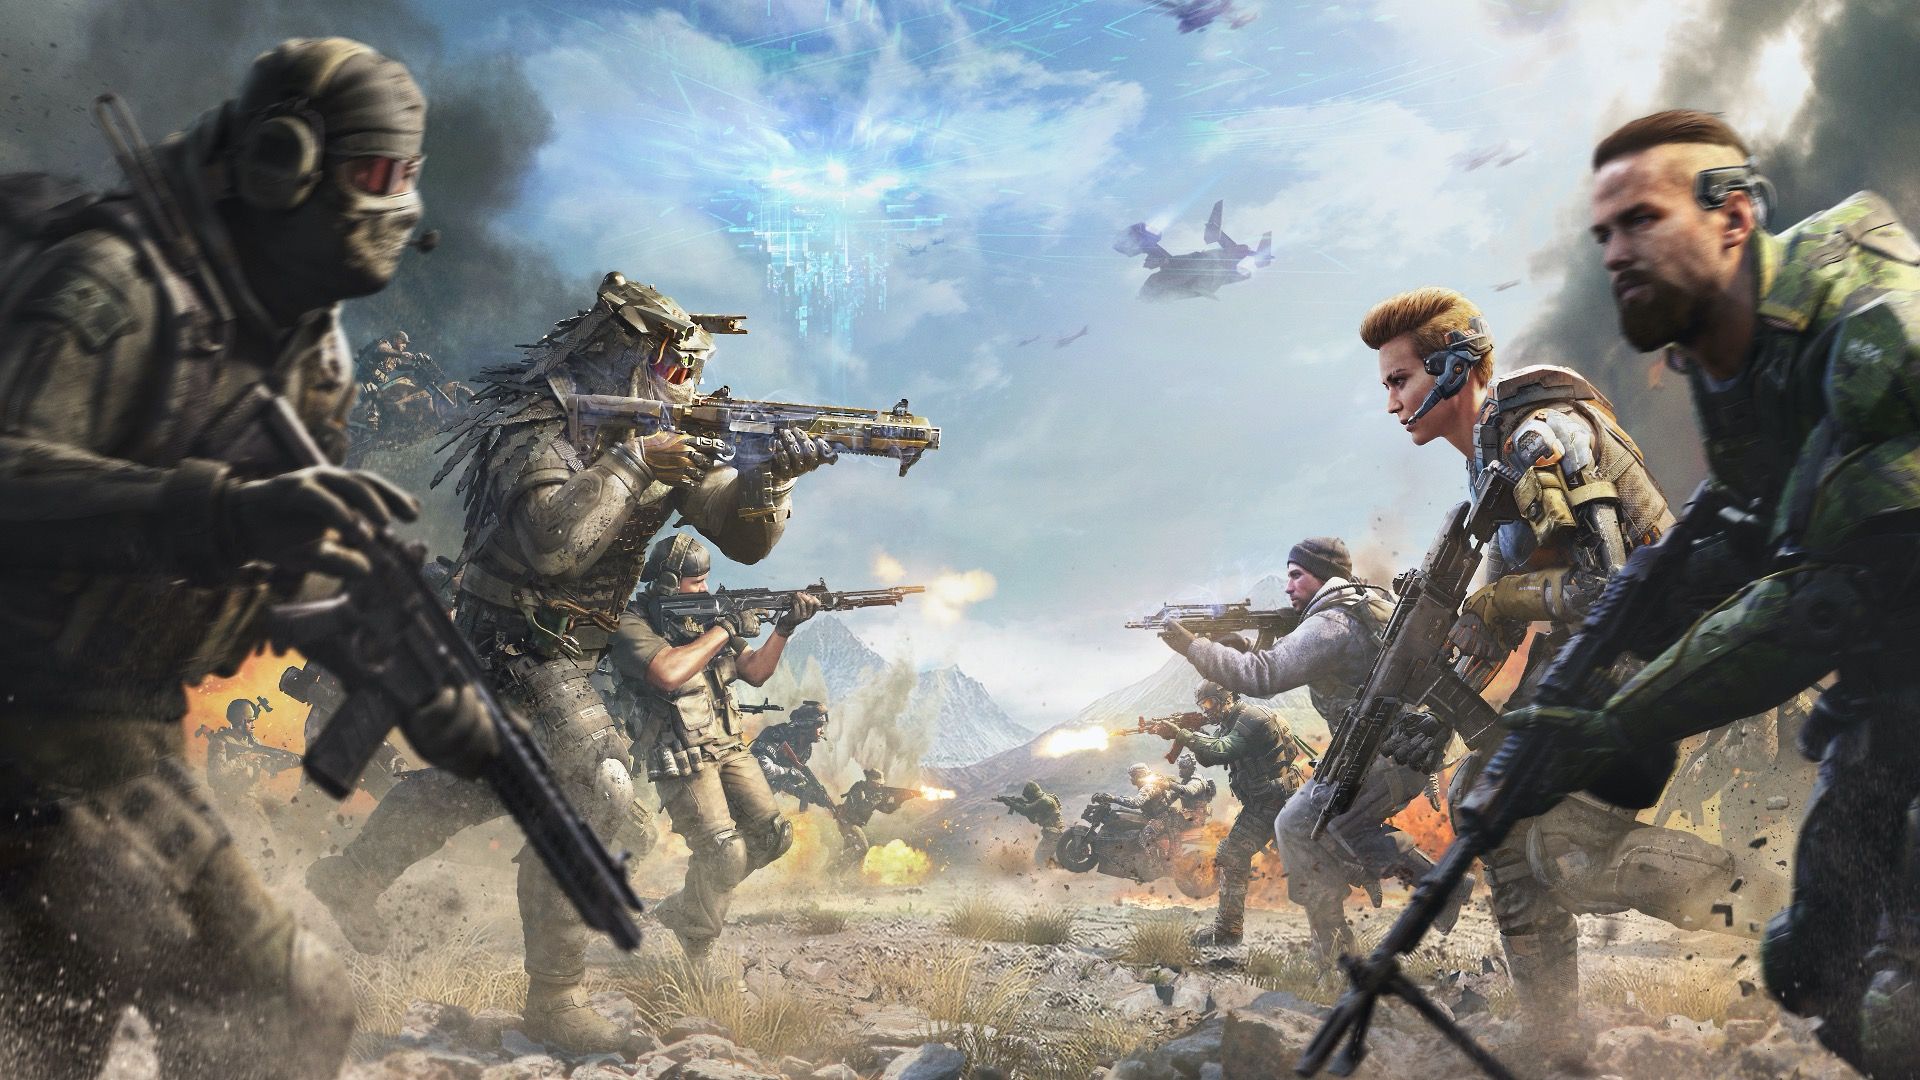 call of duty warzone mobile apk download